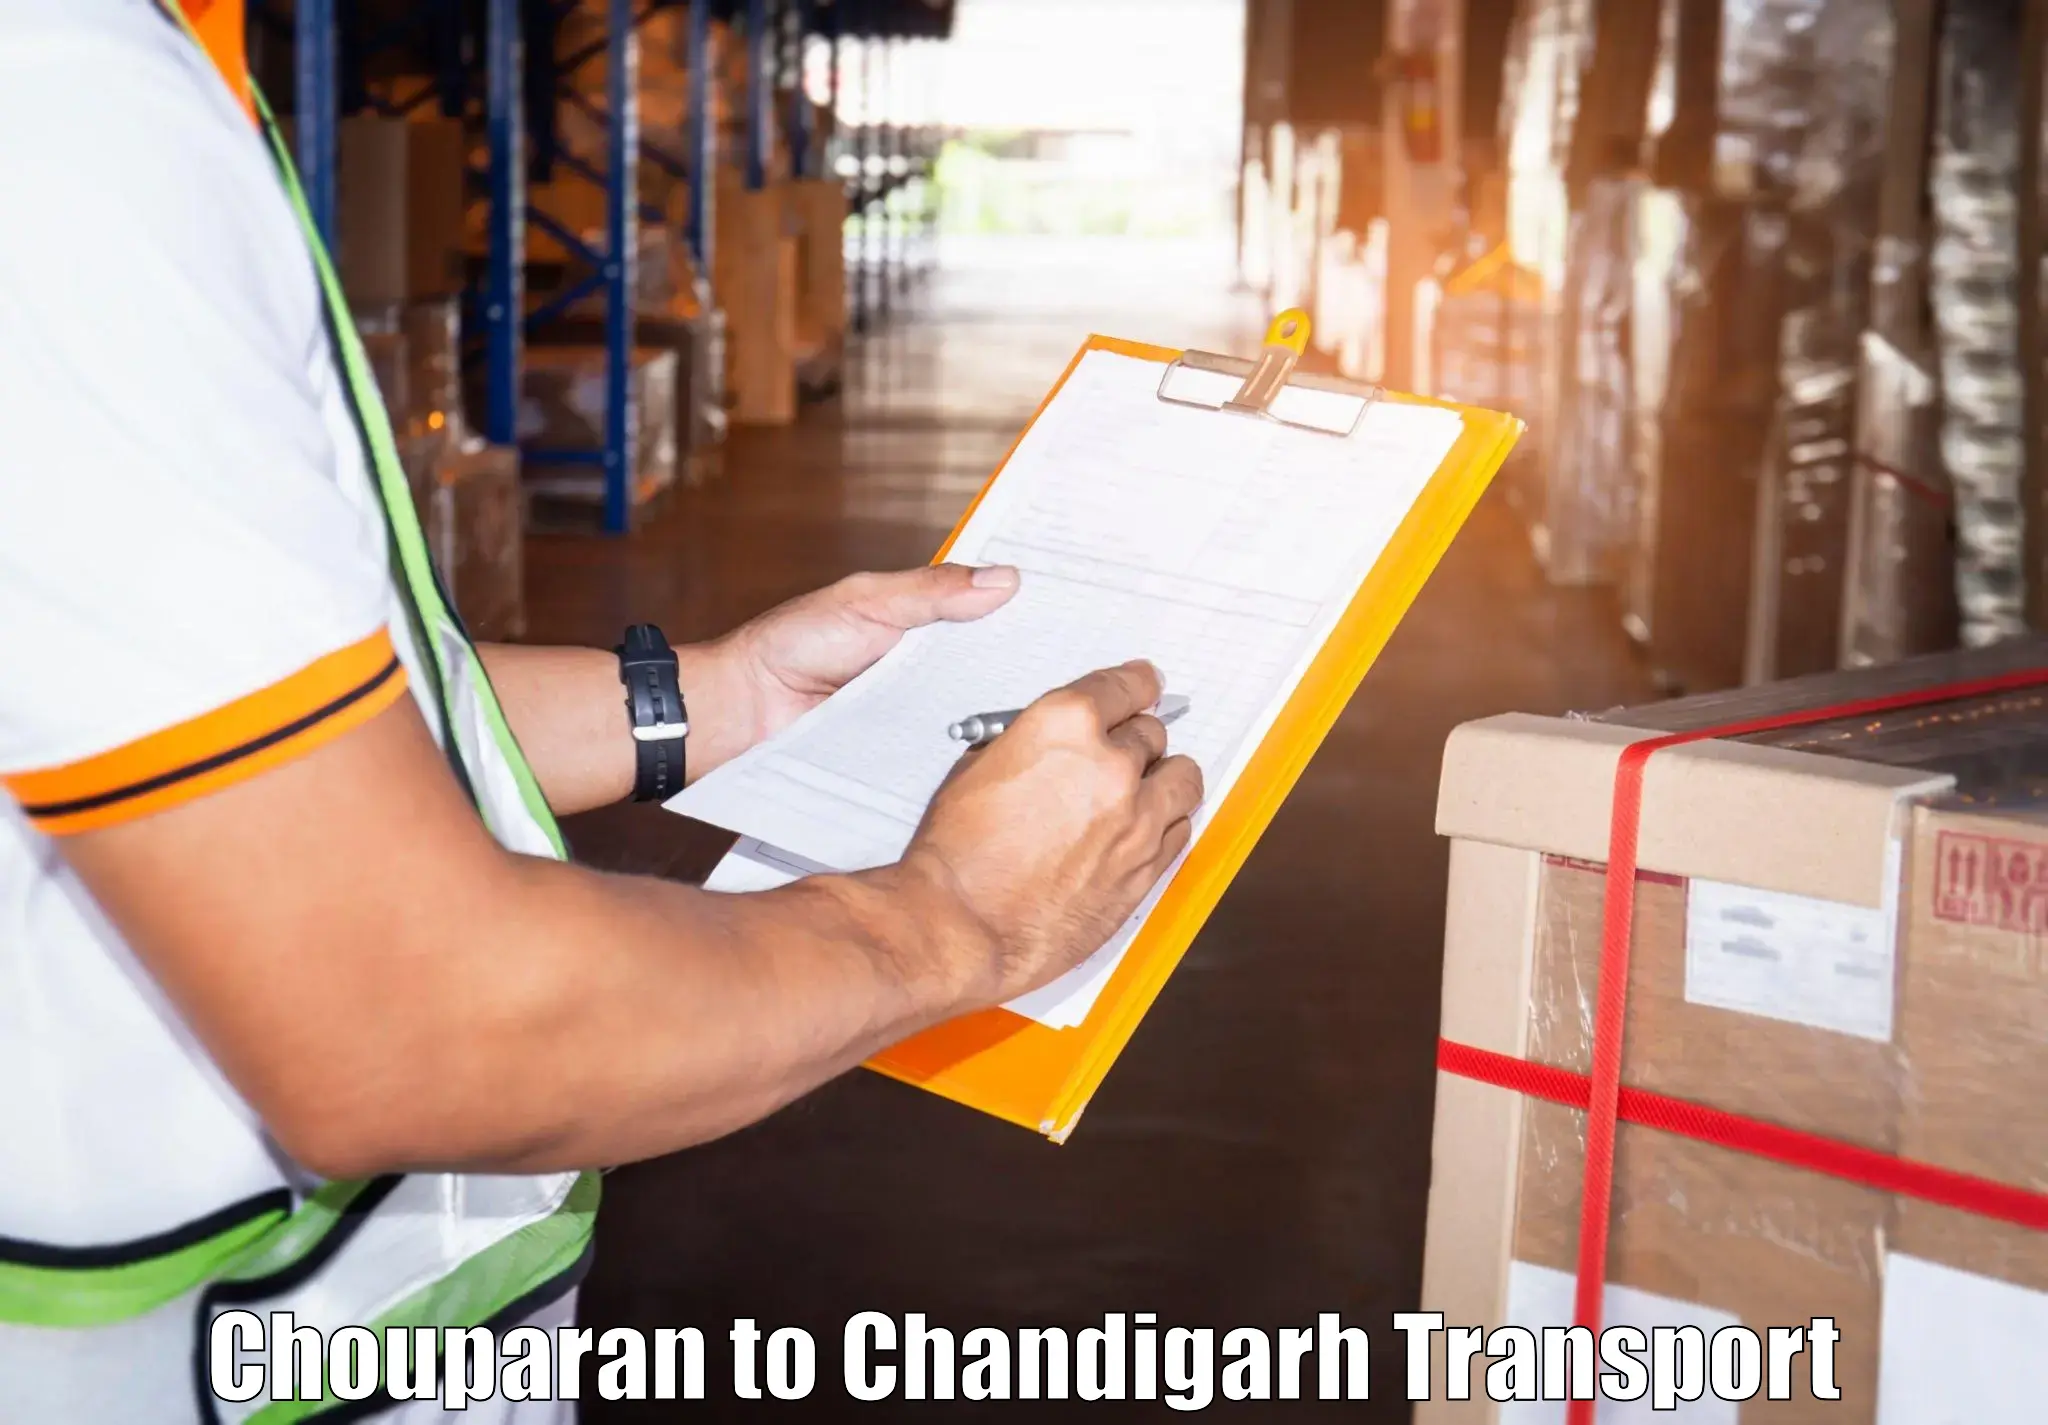 Cargo transport services Chouparan to Chandigarh